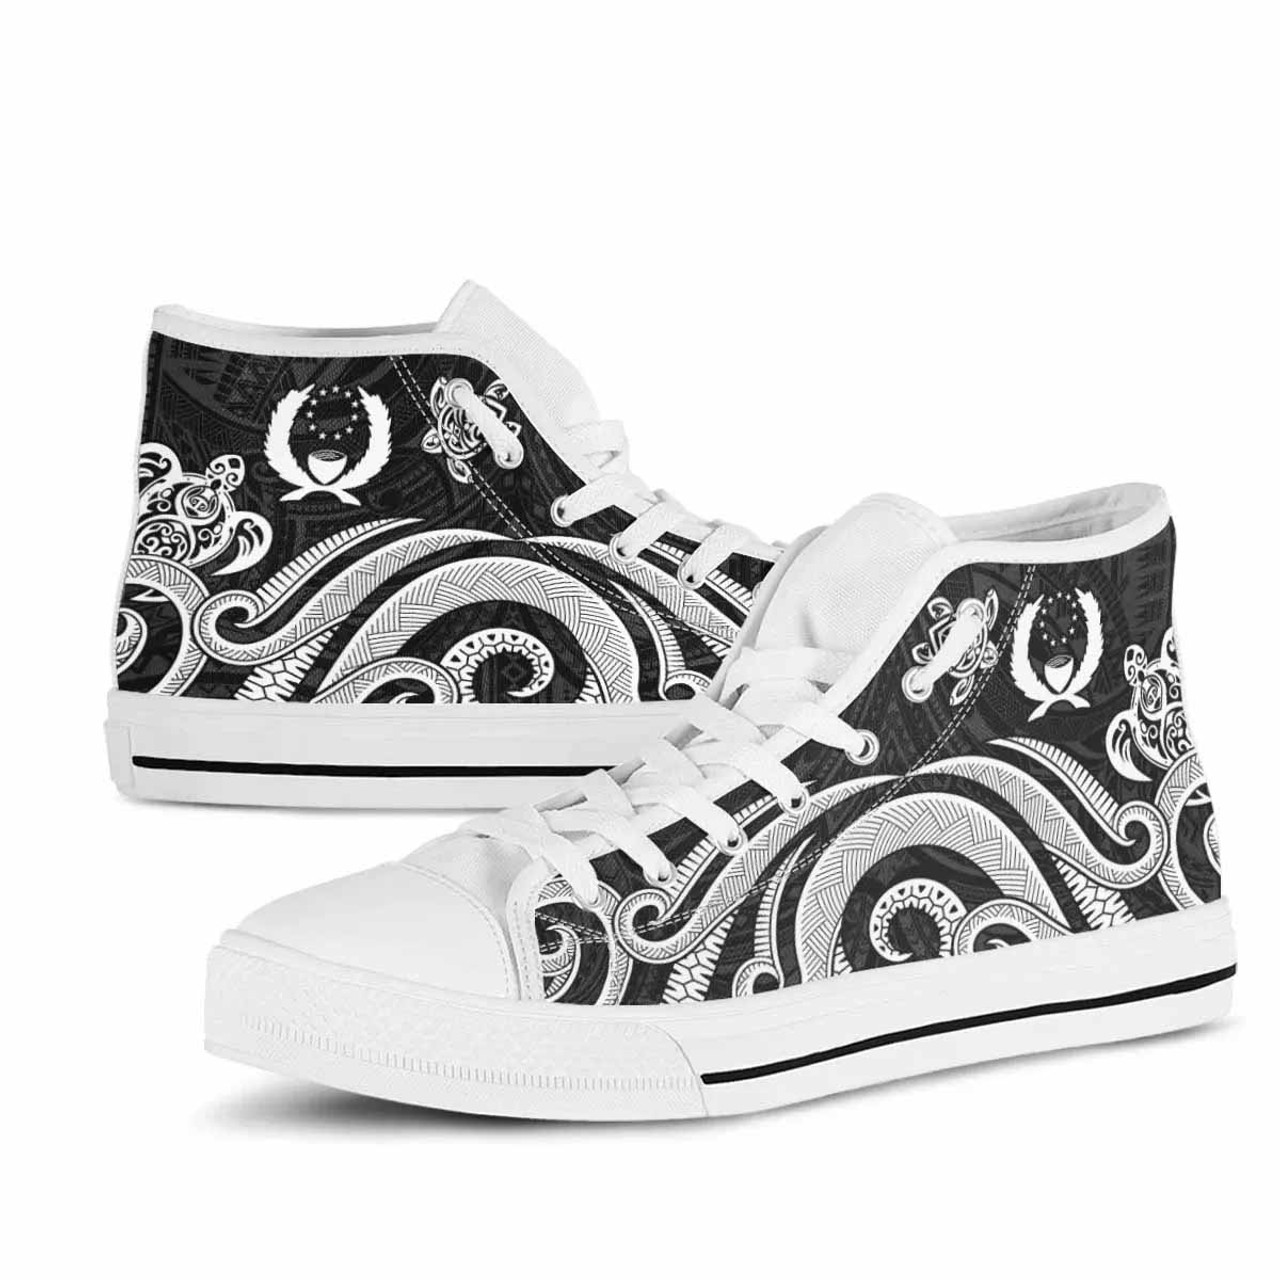 Pohnpei High Top Shoes - White Tentacle Turtle 9